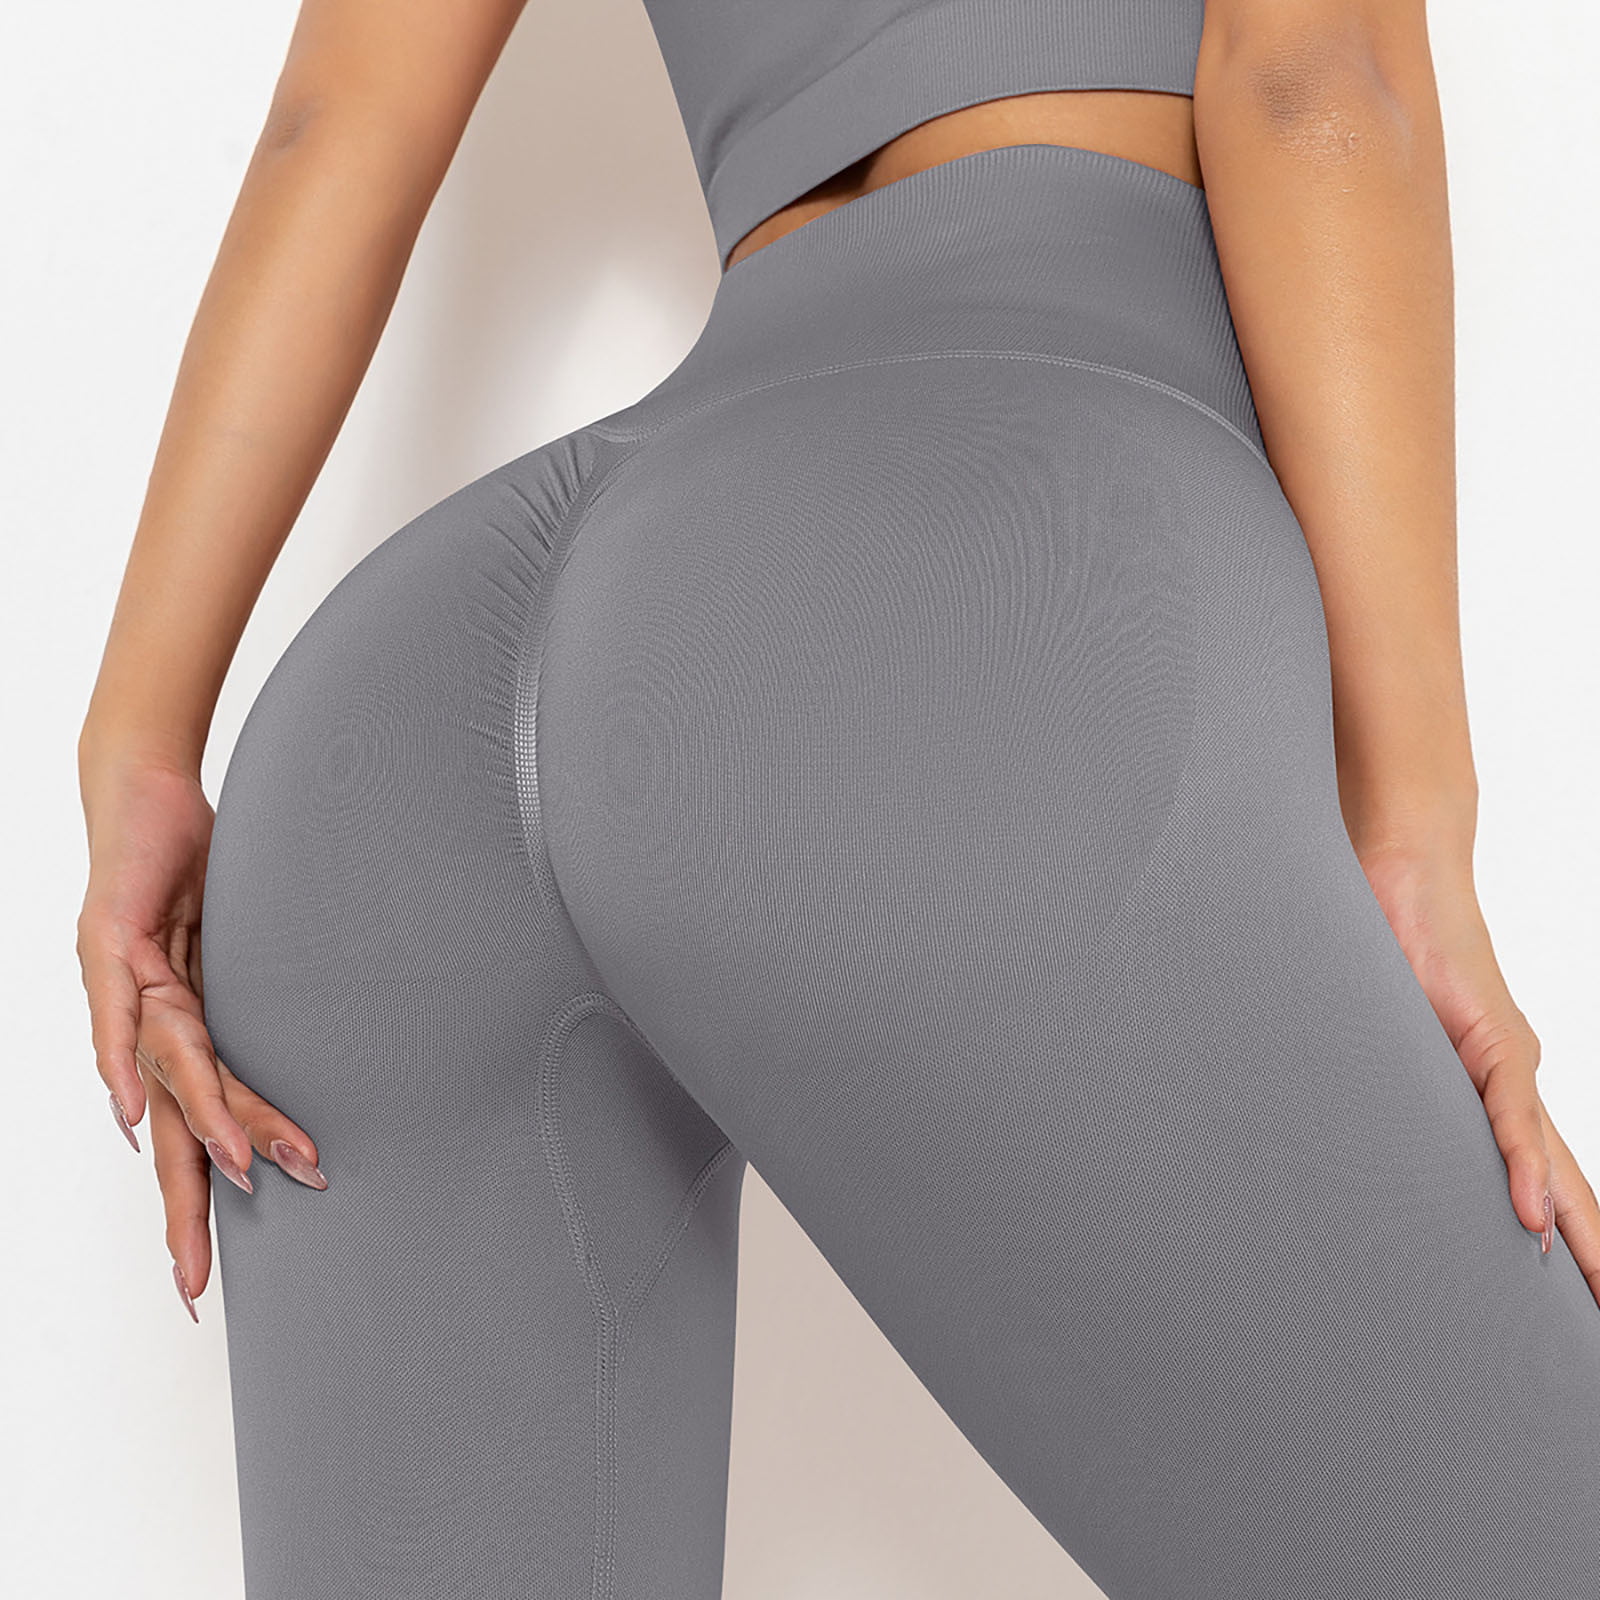 Hfyihgf High Waisted Leggings for Women Soft Comfy Tummy Control Slimming  Yoga Pants for Workout Running(Gray,M)